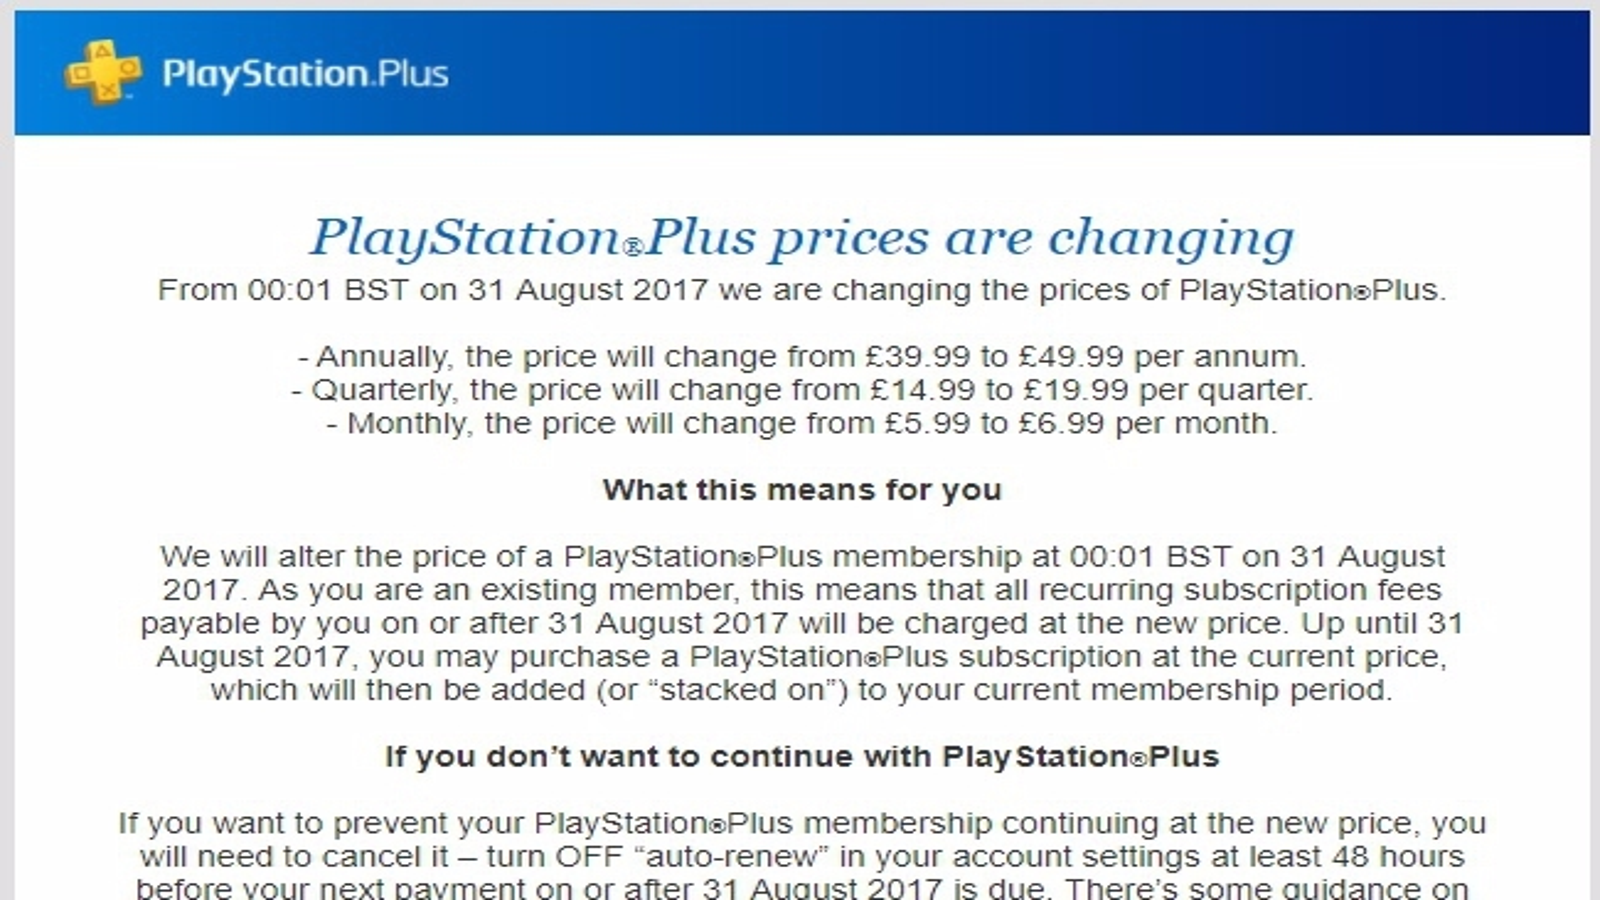 Sony Announces Price Hike For PlayStation Plus 12-Month Subscriptions  Across All Tiers - MySmartPrice